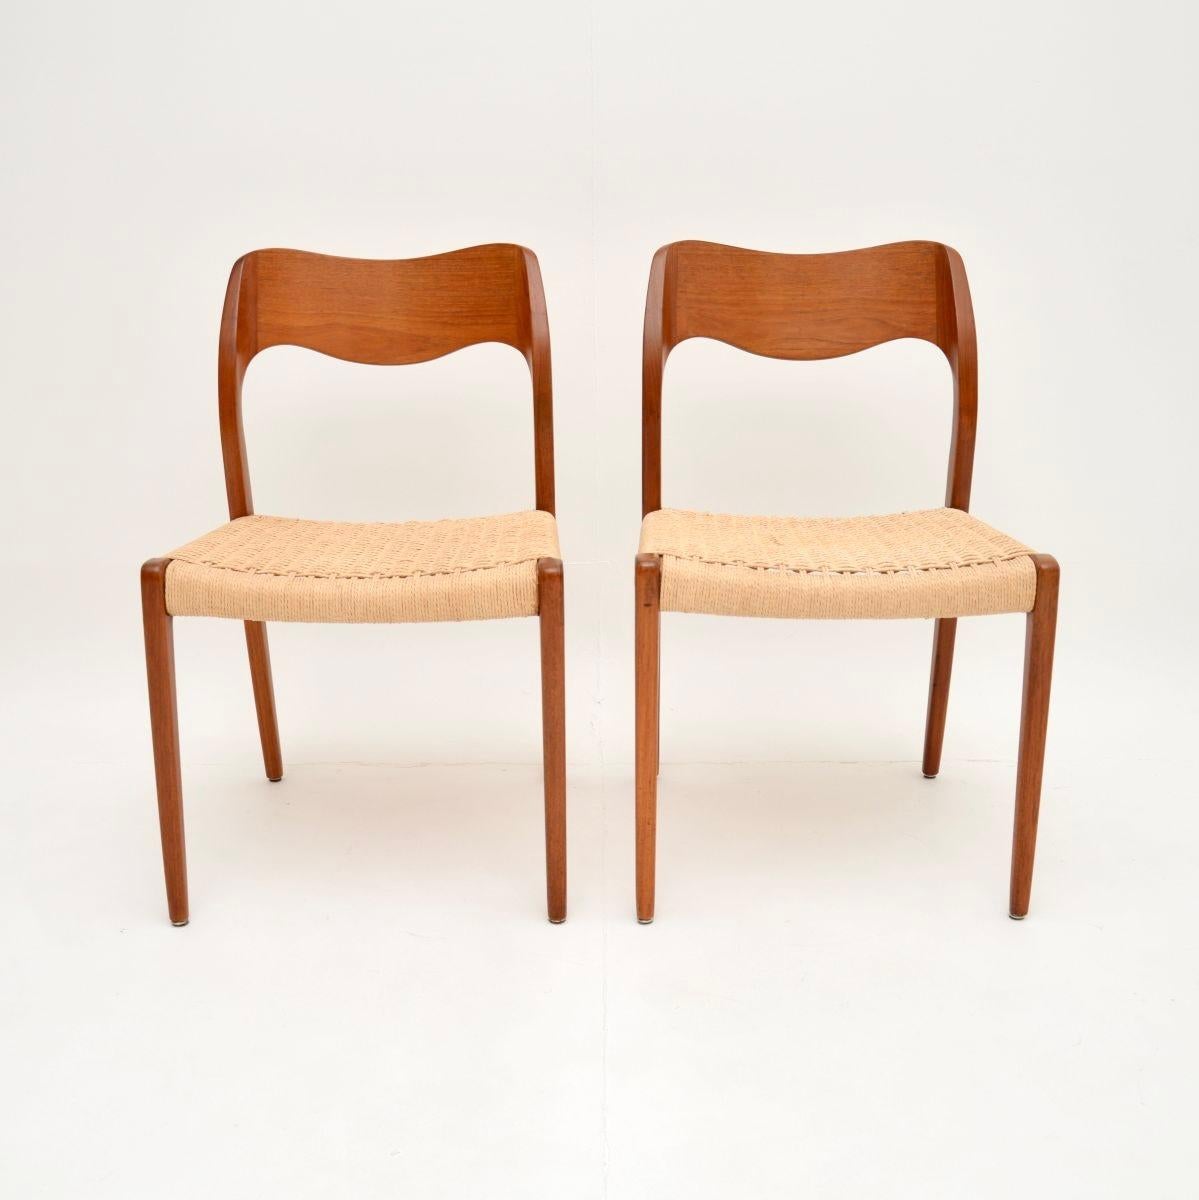 A stylish and iconic pair of Danish vintage teak model 71 chairs by Niels Moller. They were originally designed in 1951, this pair dates from around the 1960’s.

The solid teak frames are beautifully hand crafted, with a sculptural and comfortable